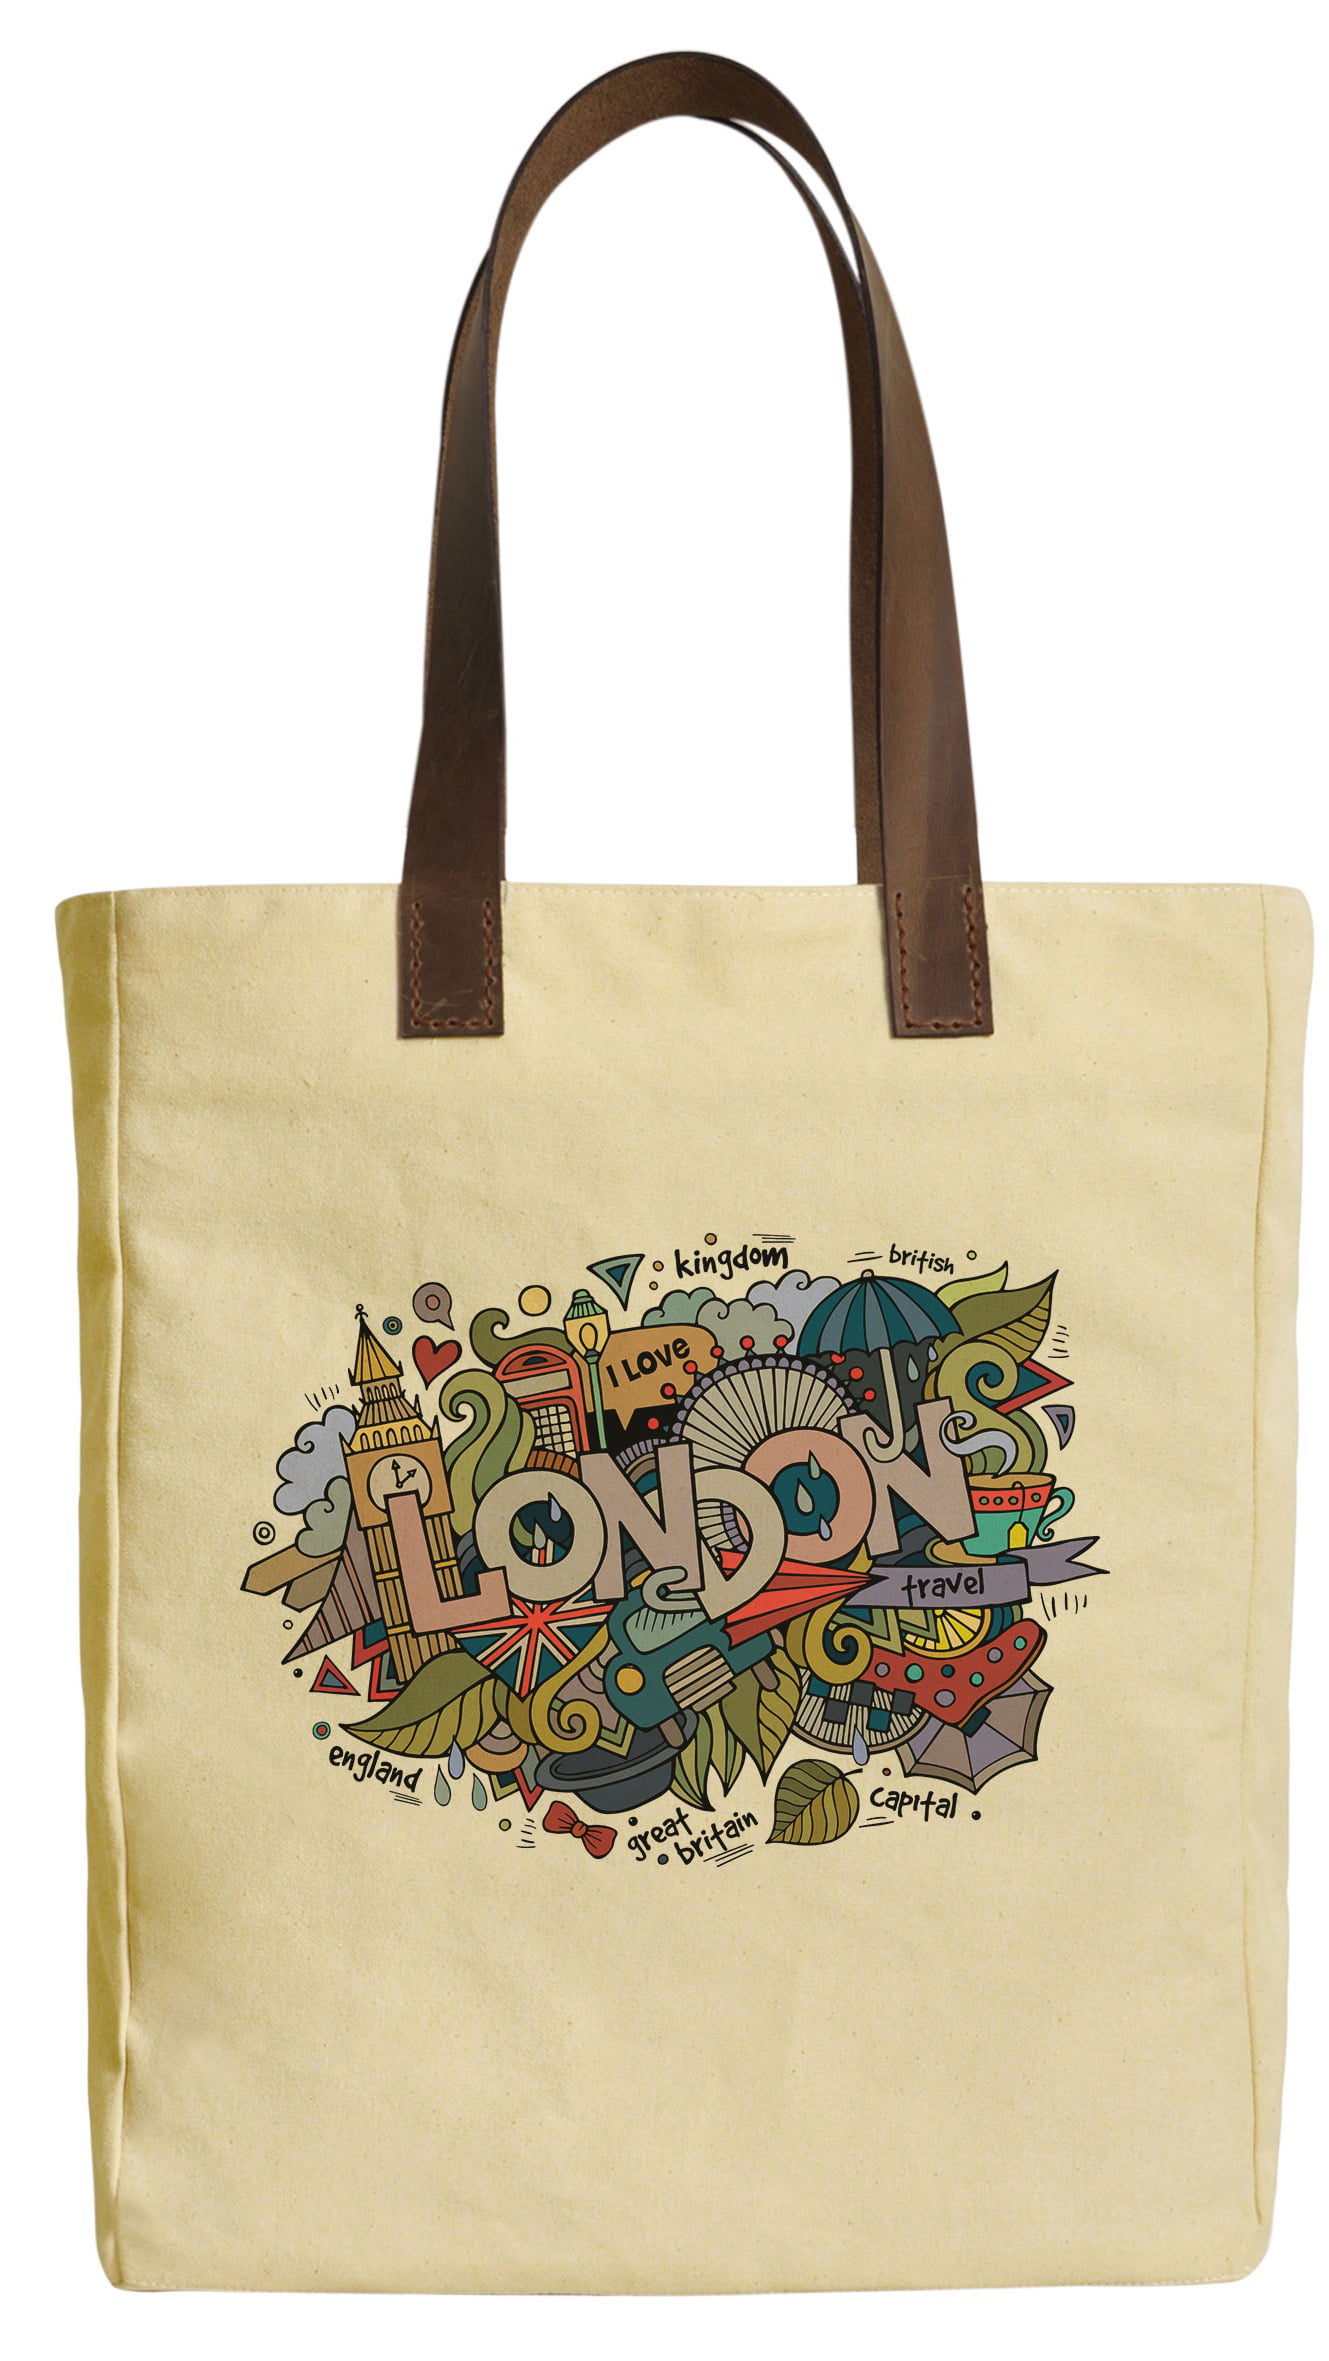 New - London Doodles Elements Beige Printed Canvas Tote Bags Leather ...